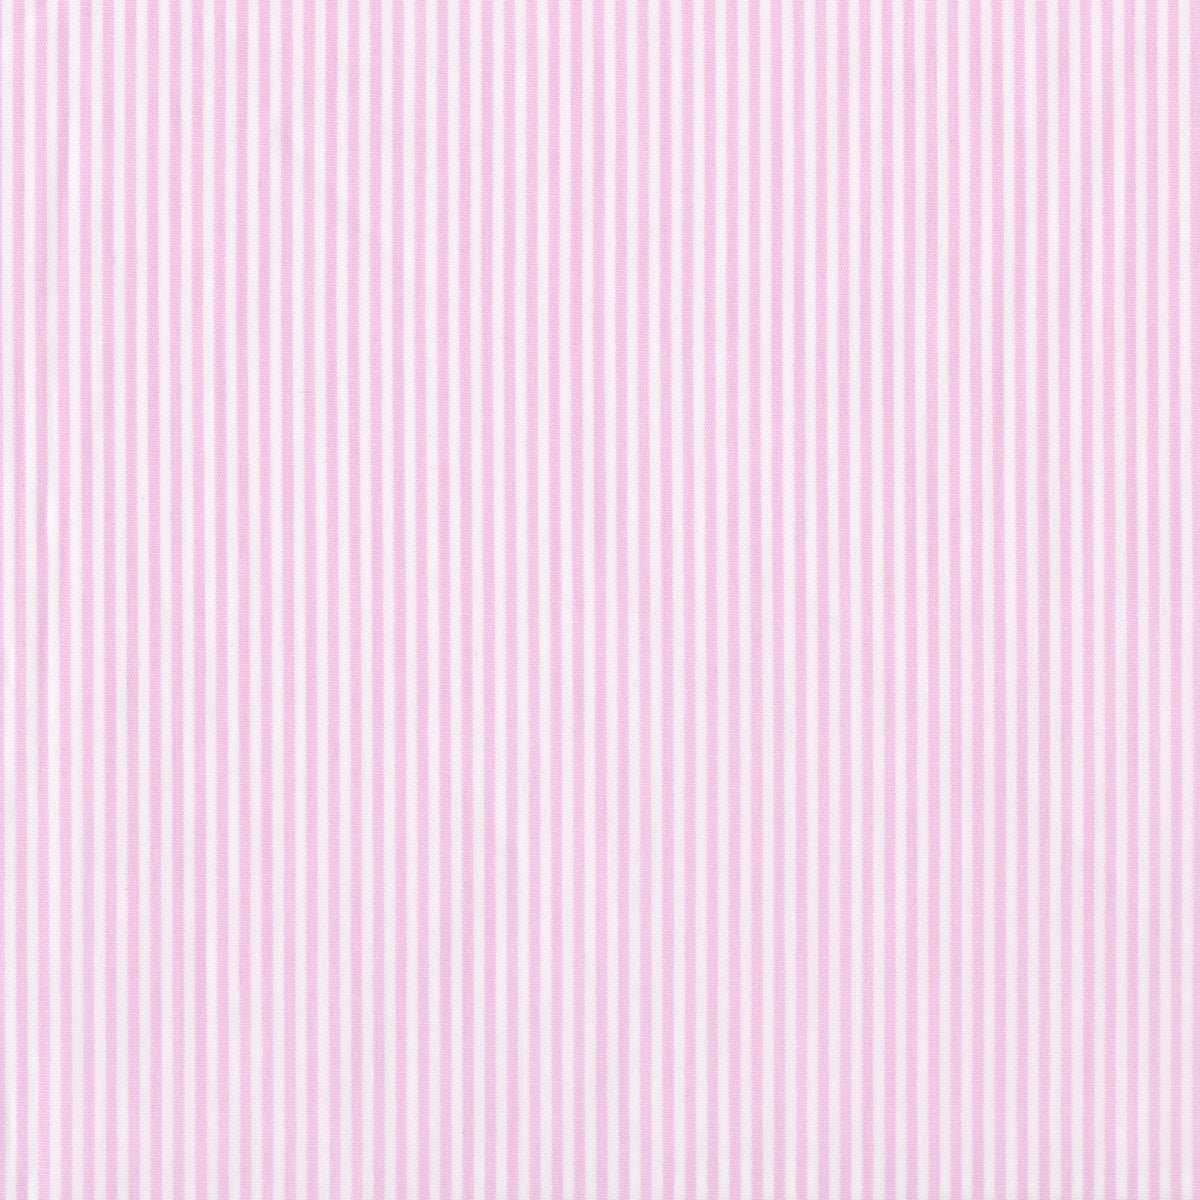 Made-to-Measure Shirt in Pink Small Bengal Stripe Poplin